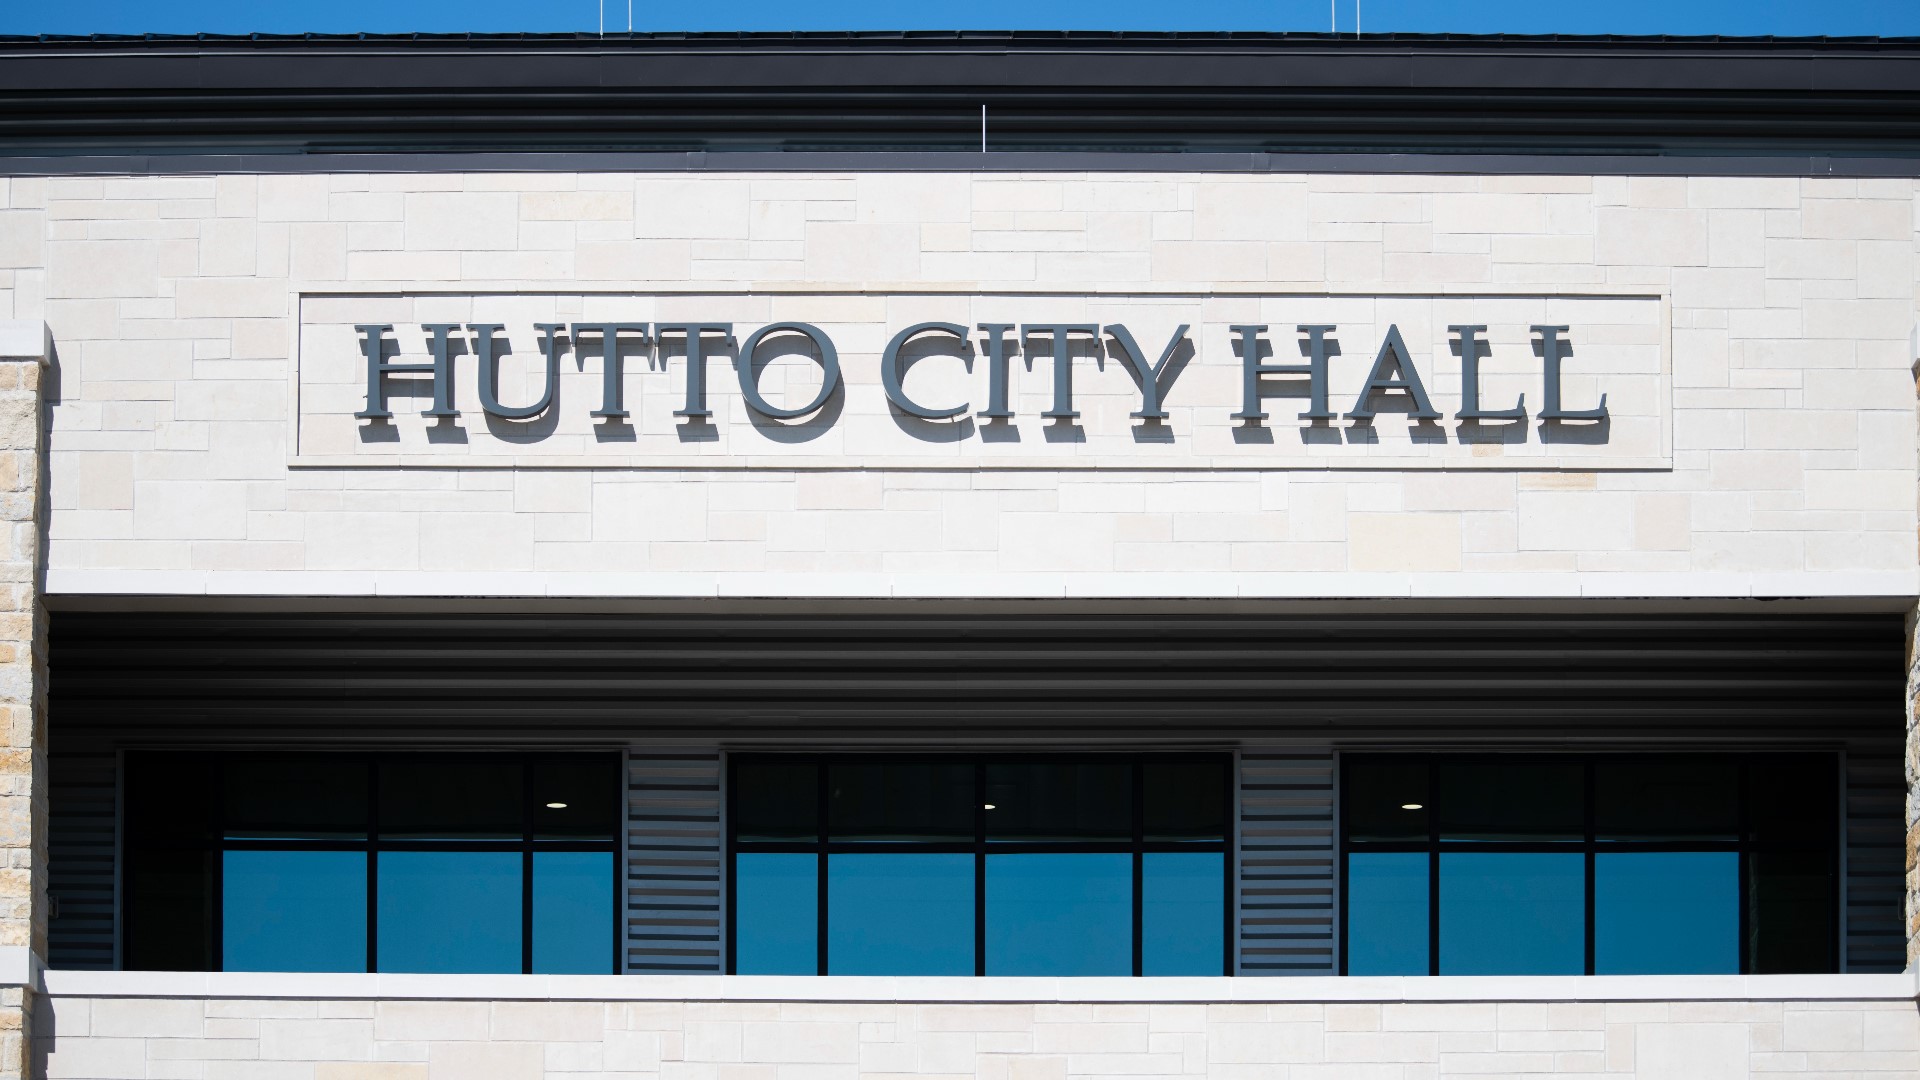 Growth is happening everywhere in Central Texas. New buildings go up, sometimes taking history with them. But in Hutto, the history and future are coming together.